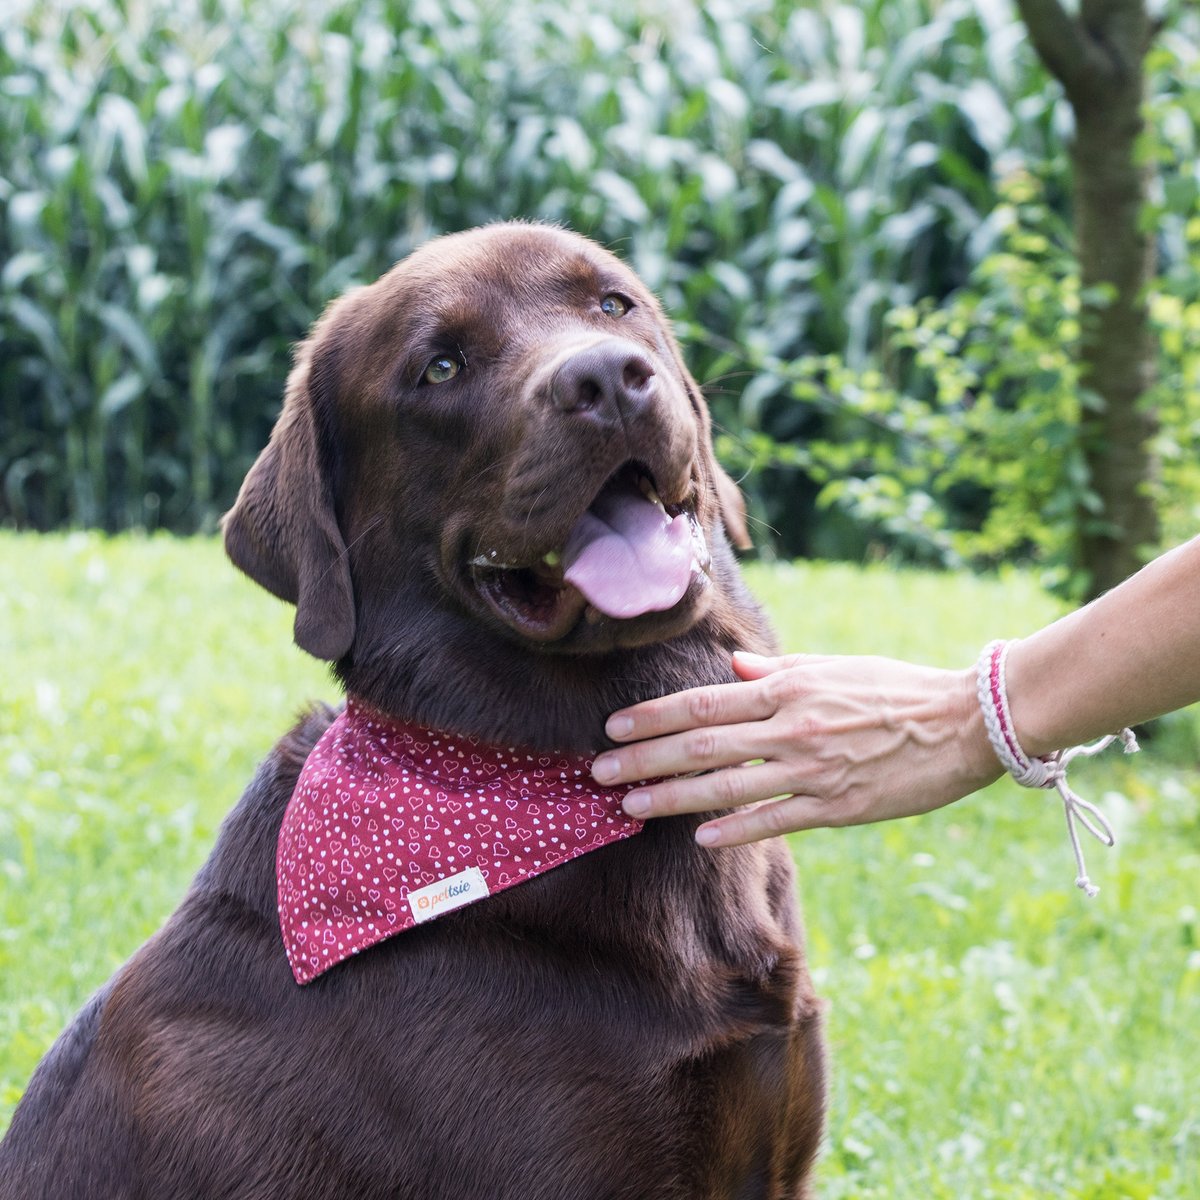 Show off your bond in style with Pettsie's dog collar featuring a cute bandana, plus a matching friendship bracelet for you! 🐶💖 Because true friendship deserves to be celebrated! 🐾✨

#pettsie #dogcollarbowtie #dogbandana #dapperdog #dapperdogs